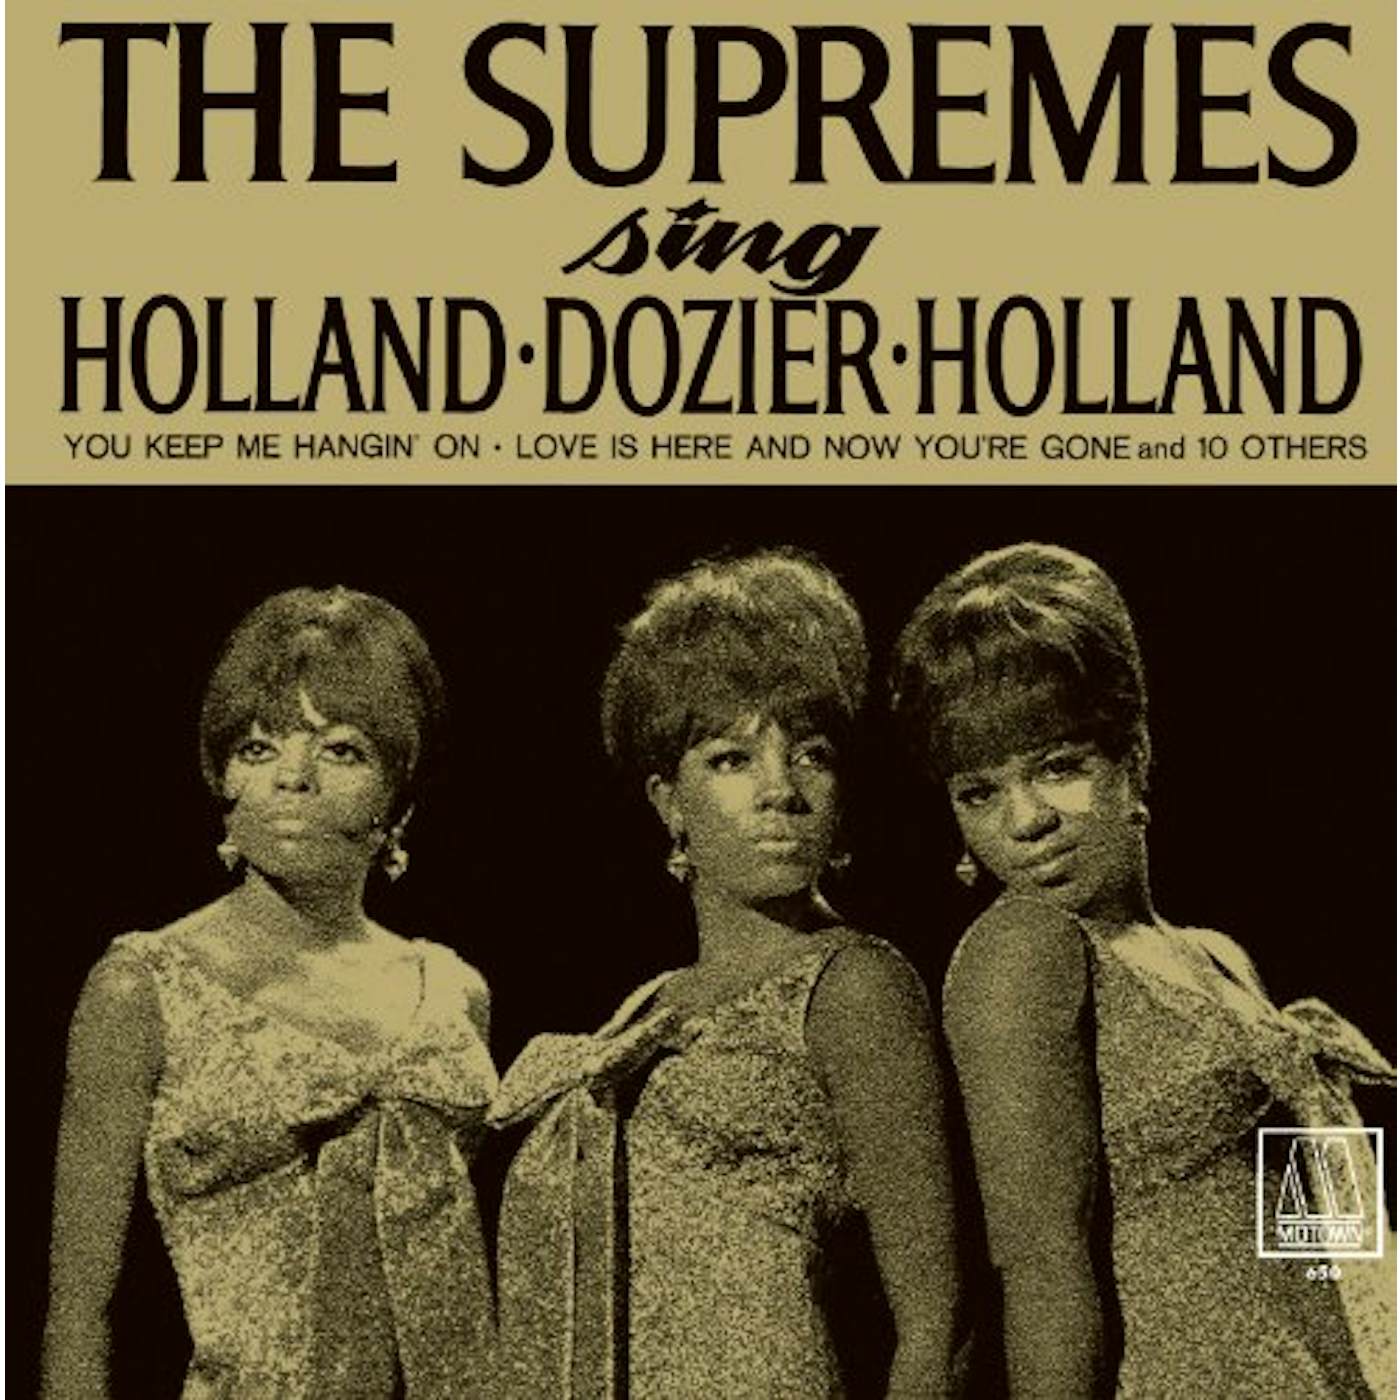 The Supremes SING HOLLAND DOZIER HOLLAND CD